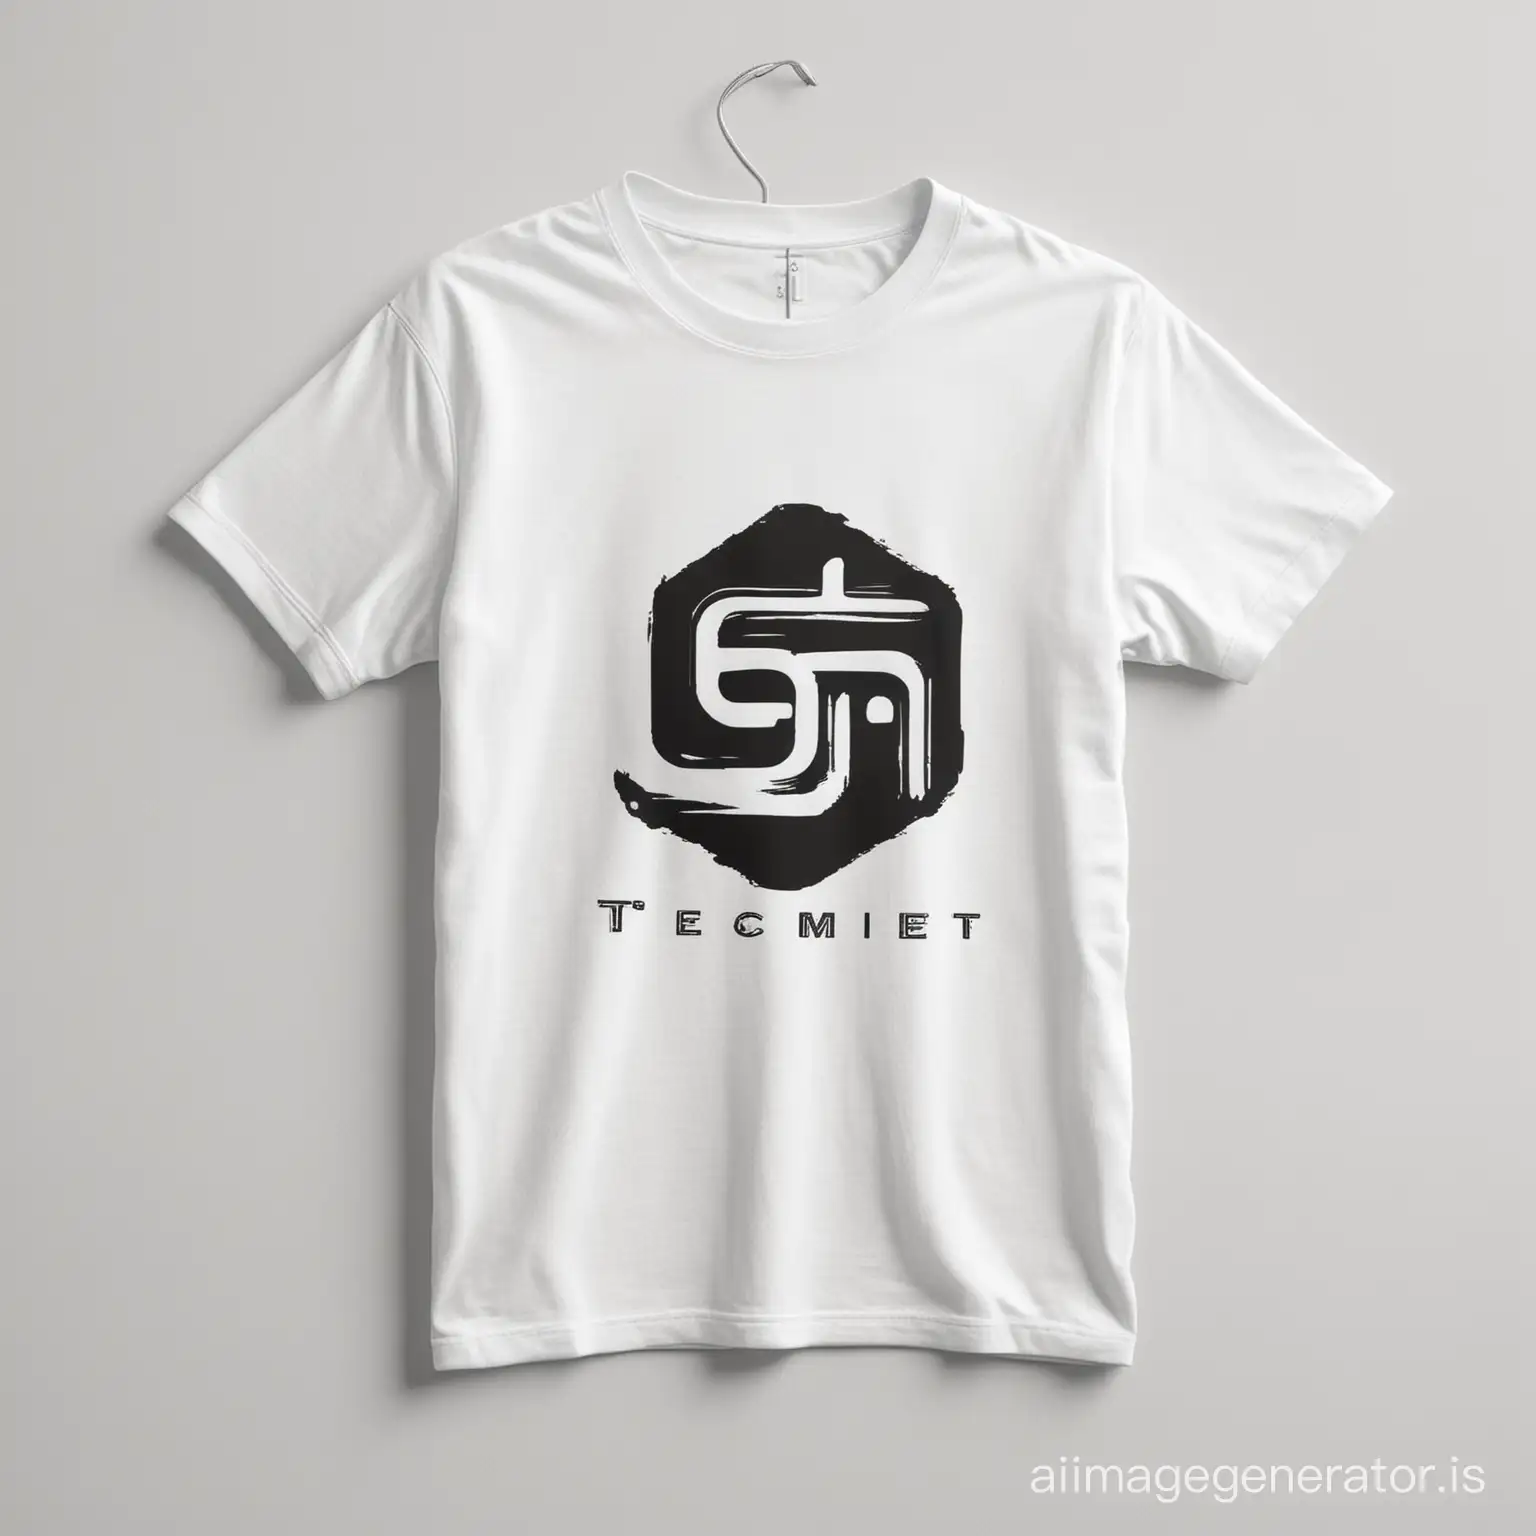 sample t-shirt logo with white background